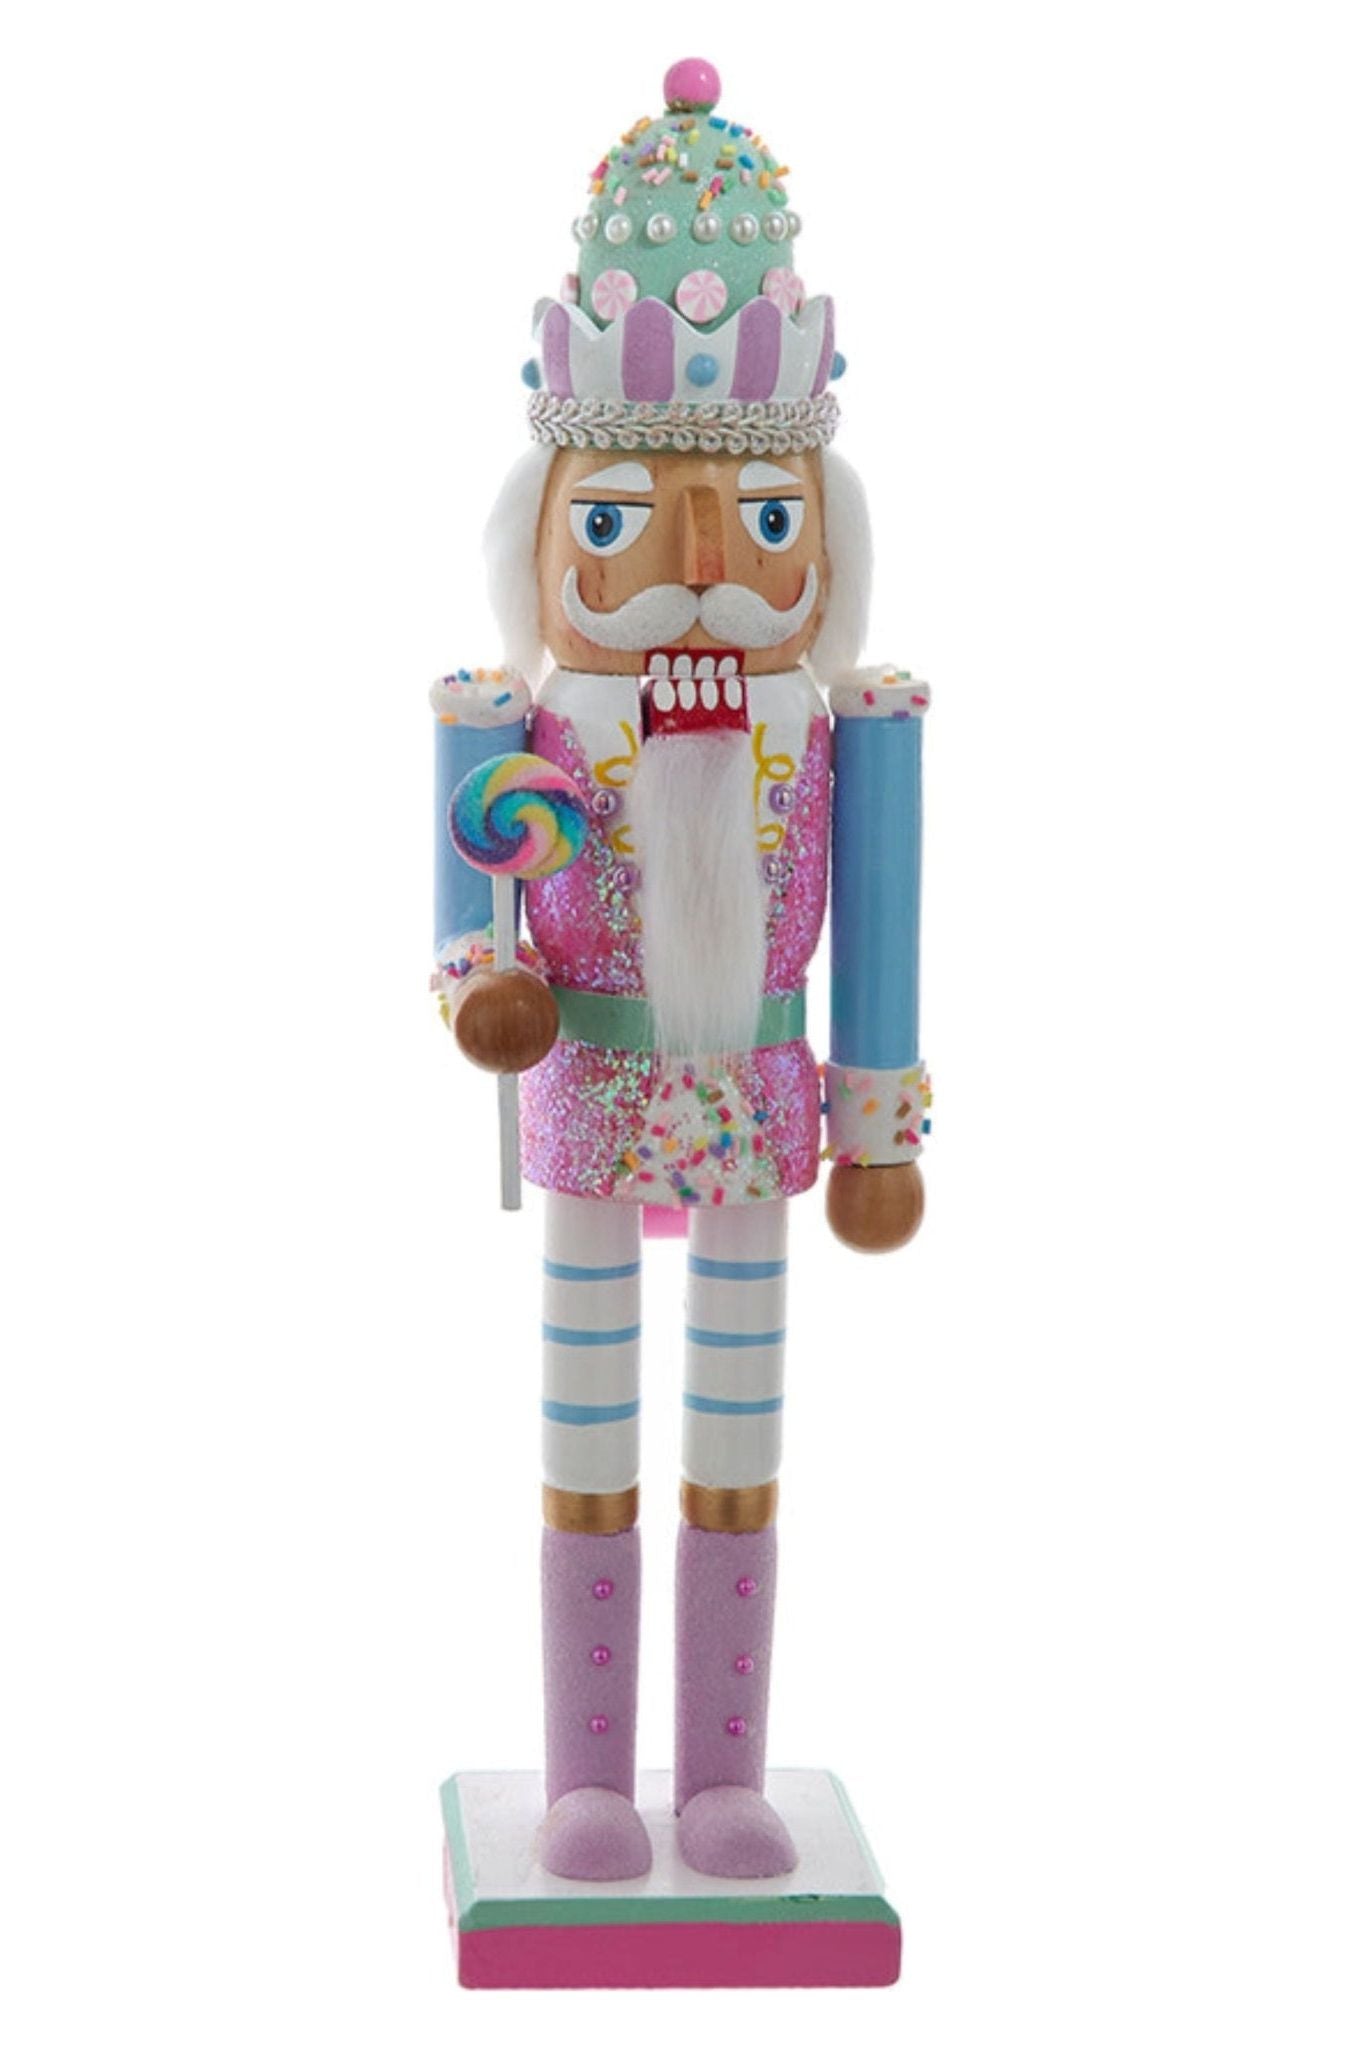 Shop For 15" Wooden Candy Color Nutcrackers F2280